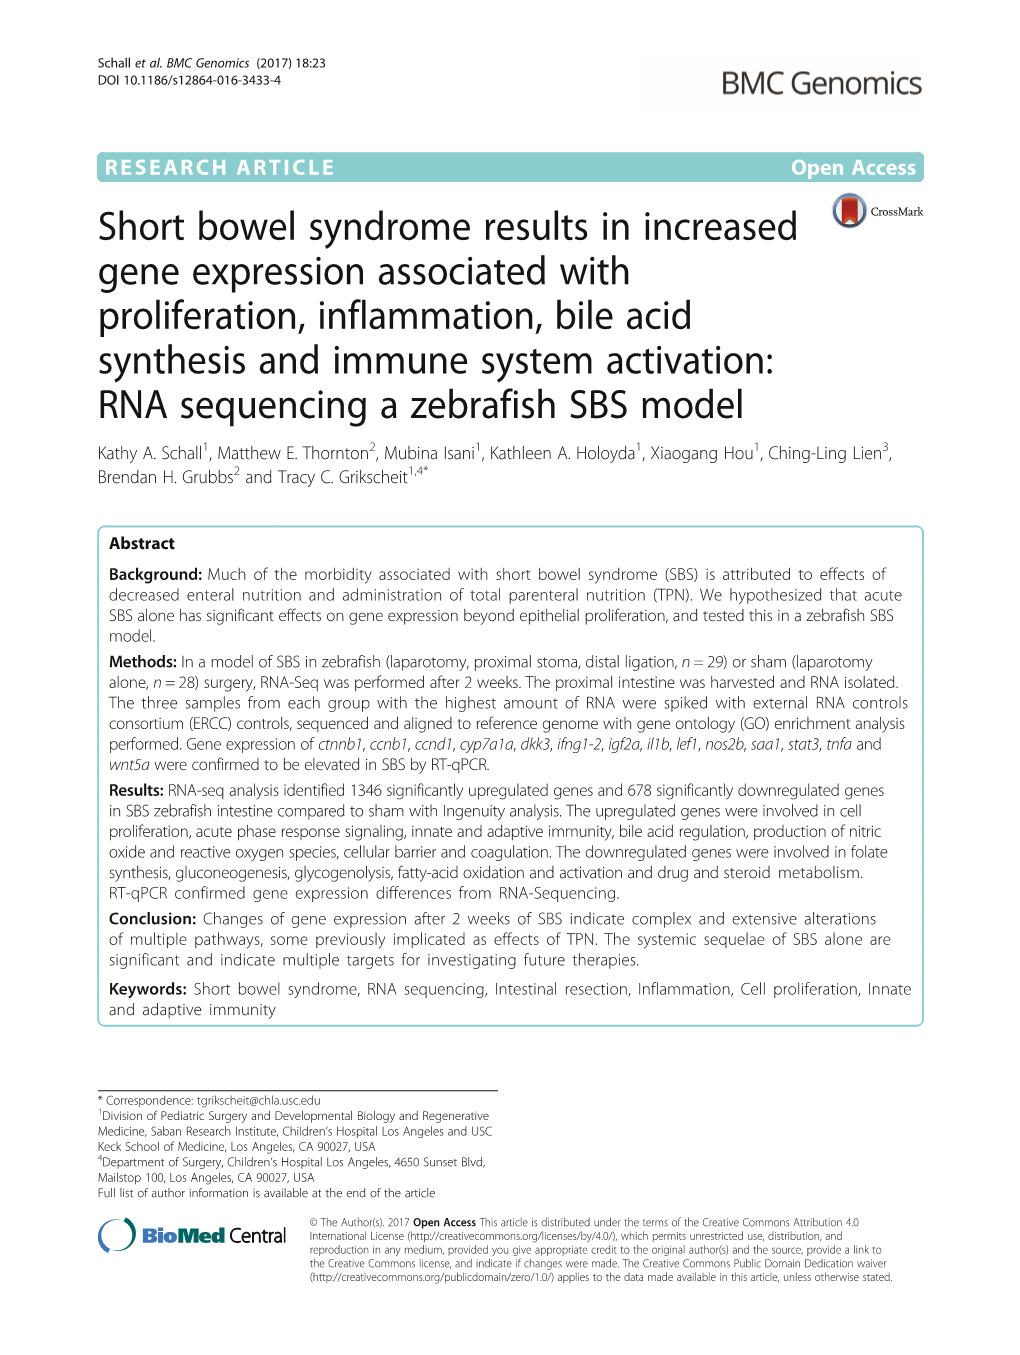 Short Bowel Syndrome Results in Increased Gene Expression